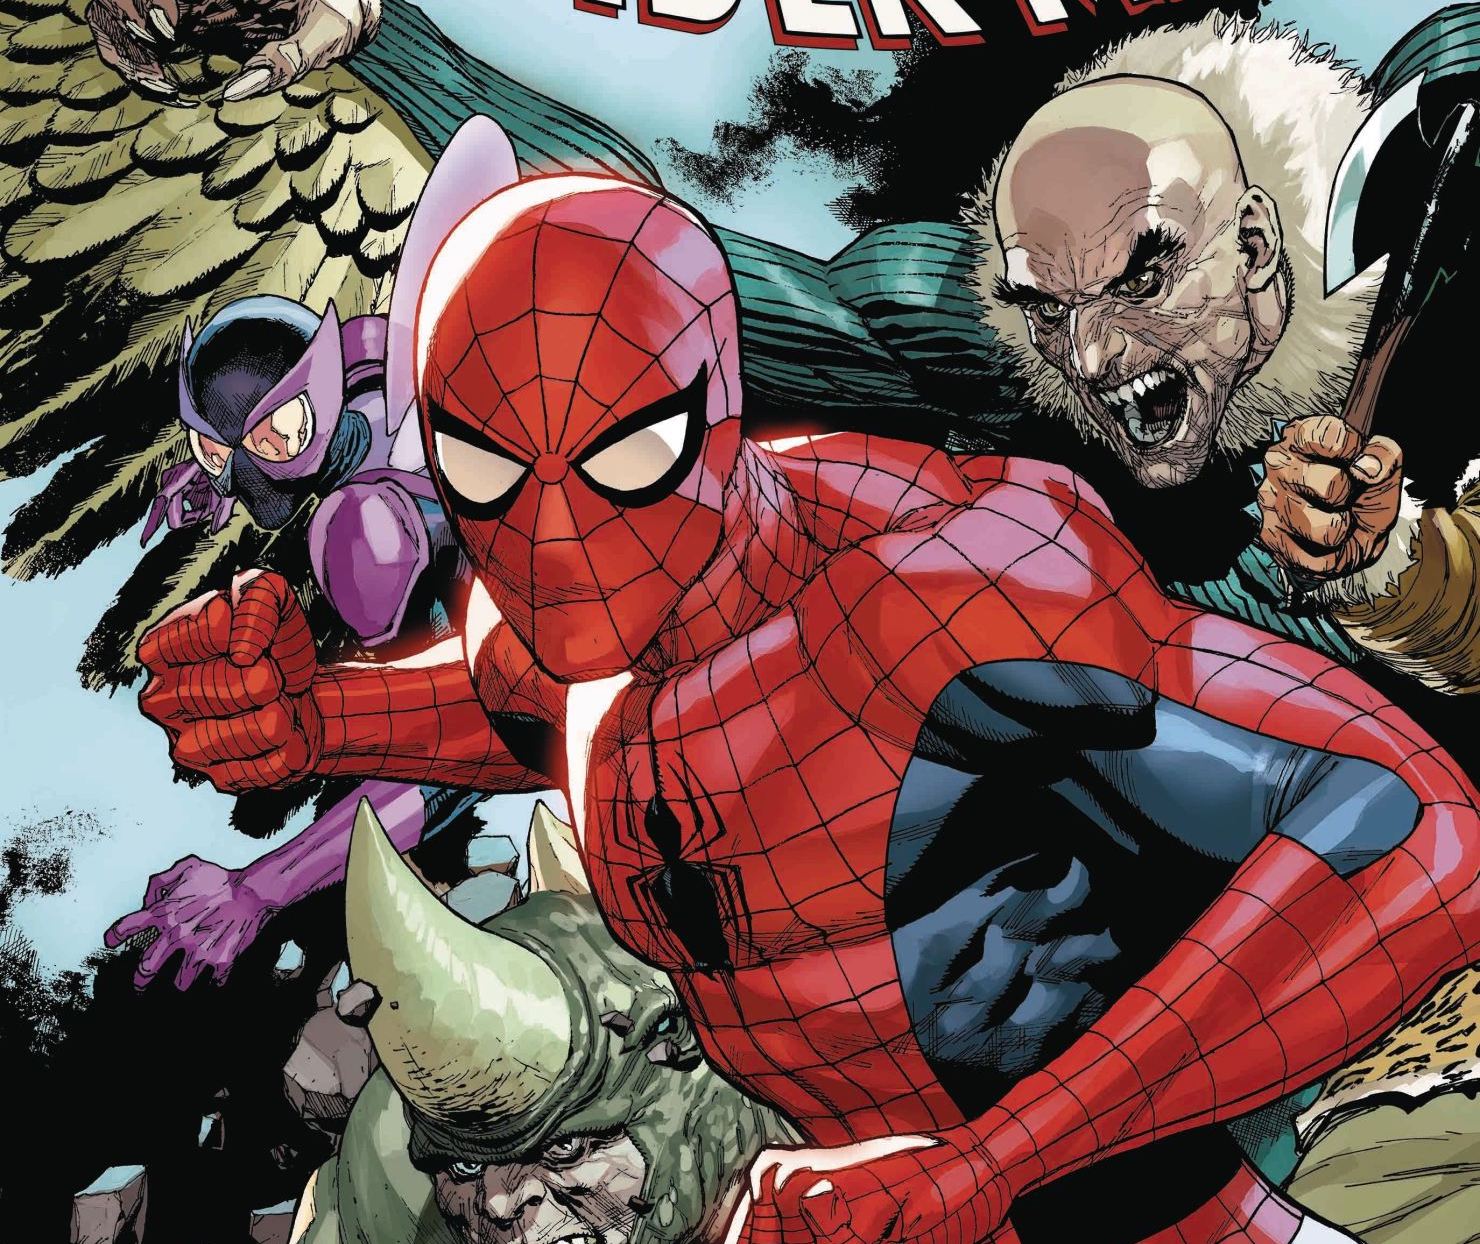 Amazing Spider-Man #17 Review